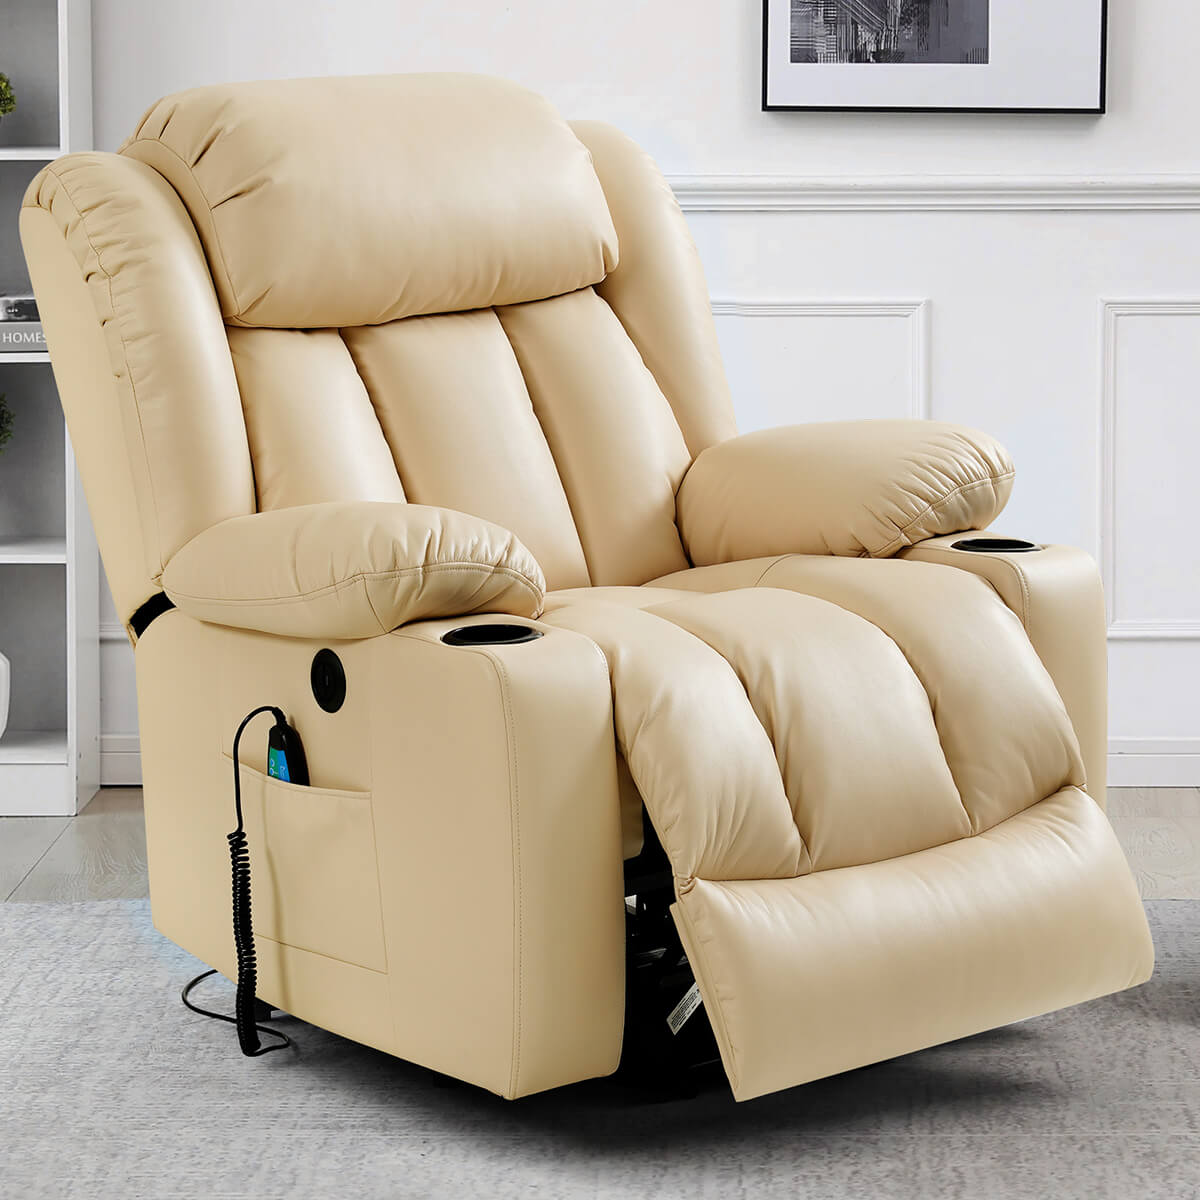 Soulout Luxury Lift Chair Recliner with Heat and Massage beige